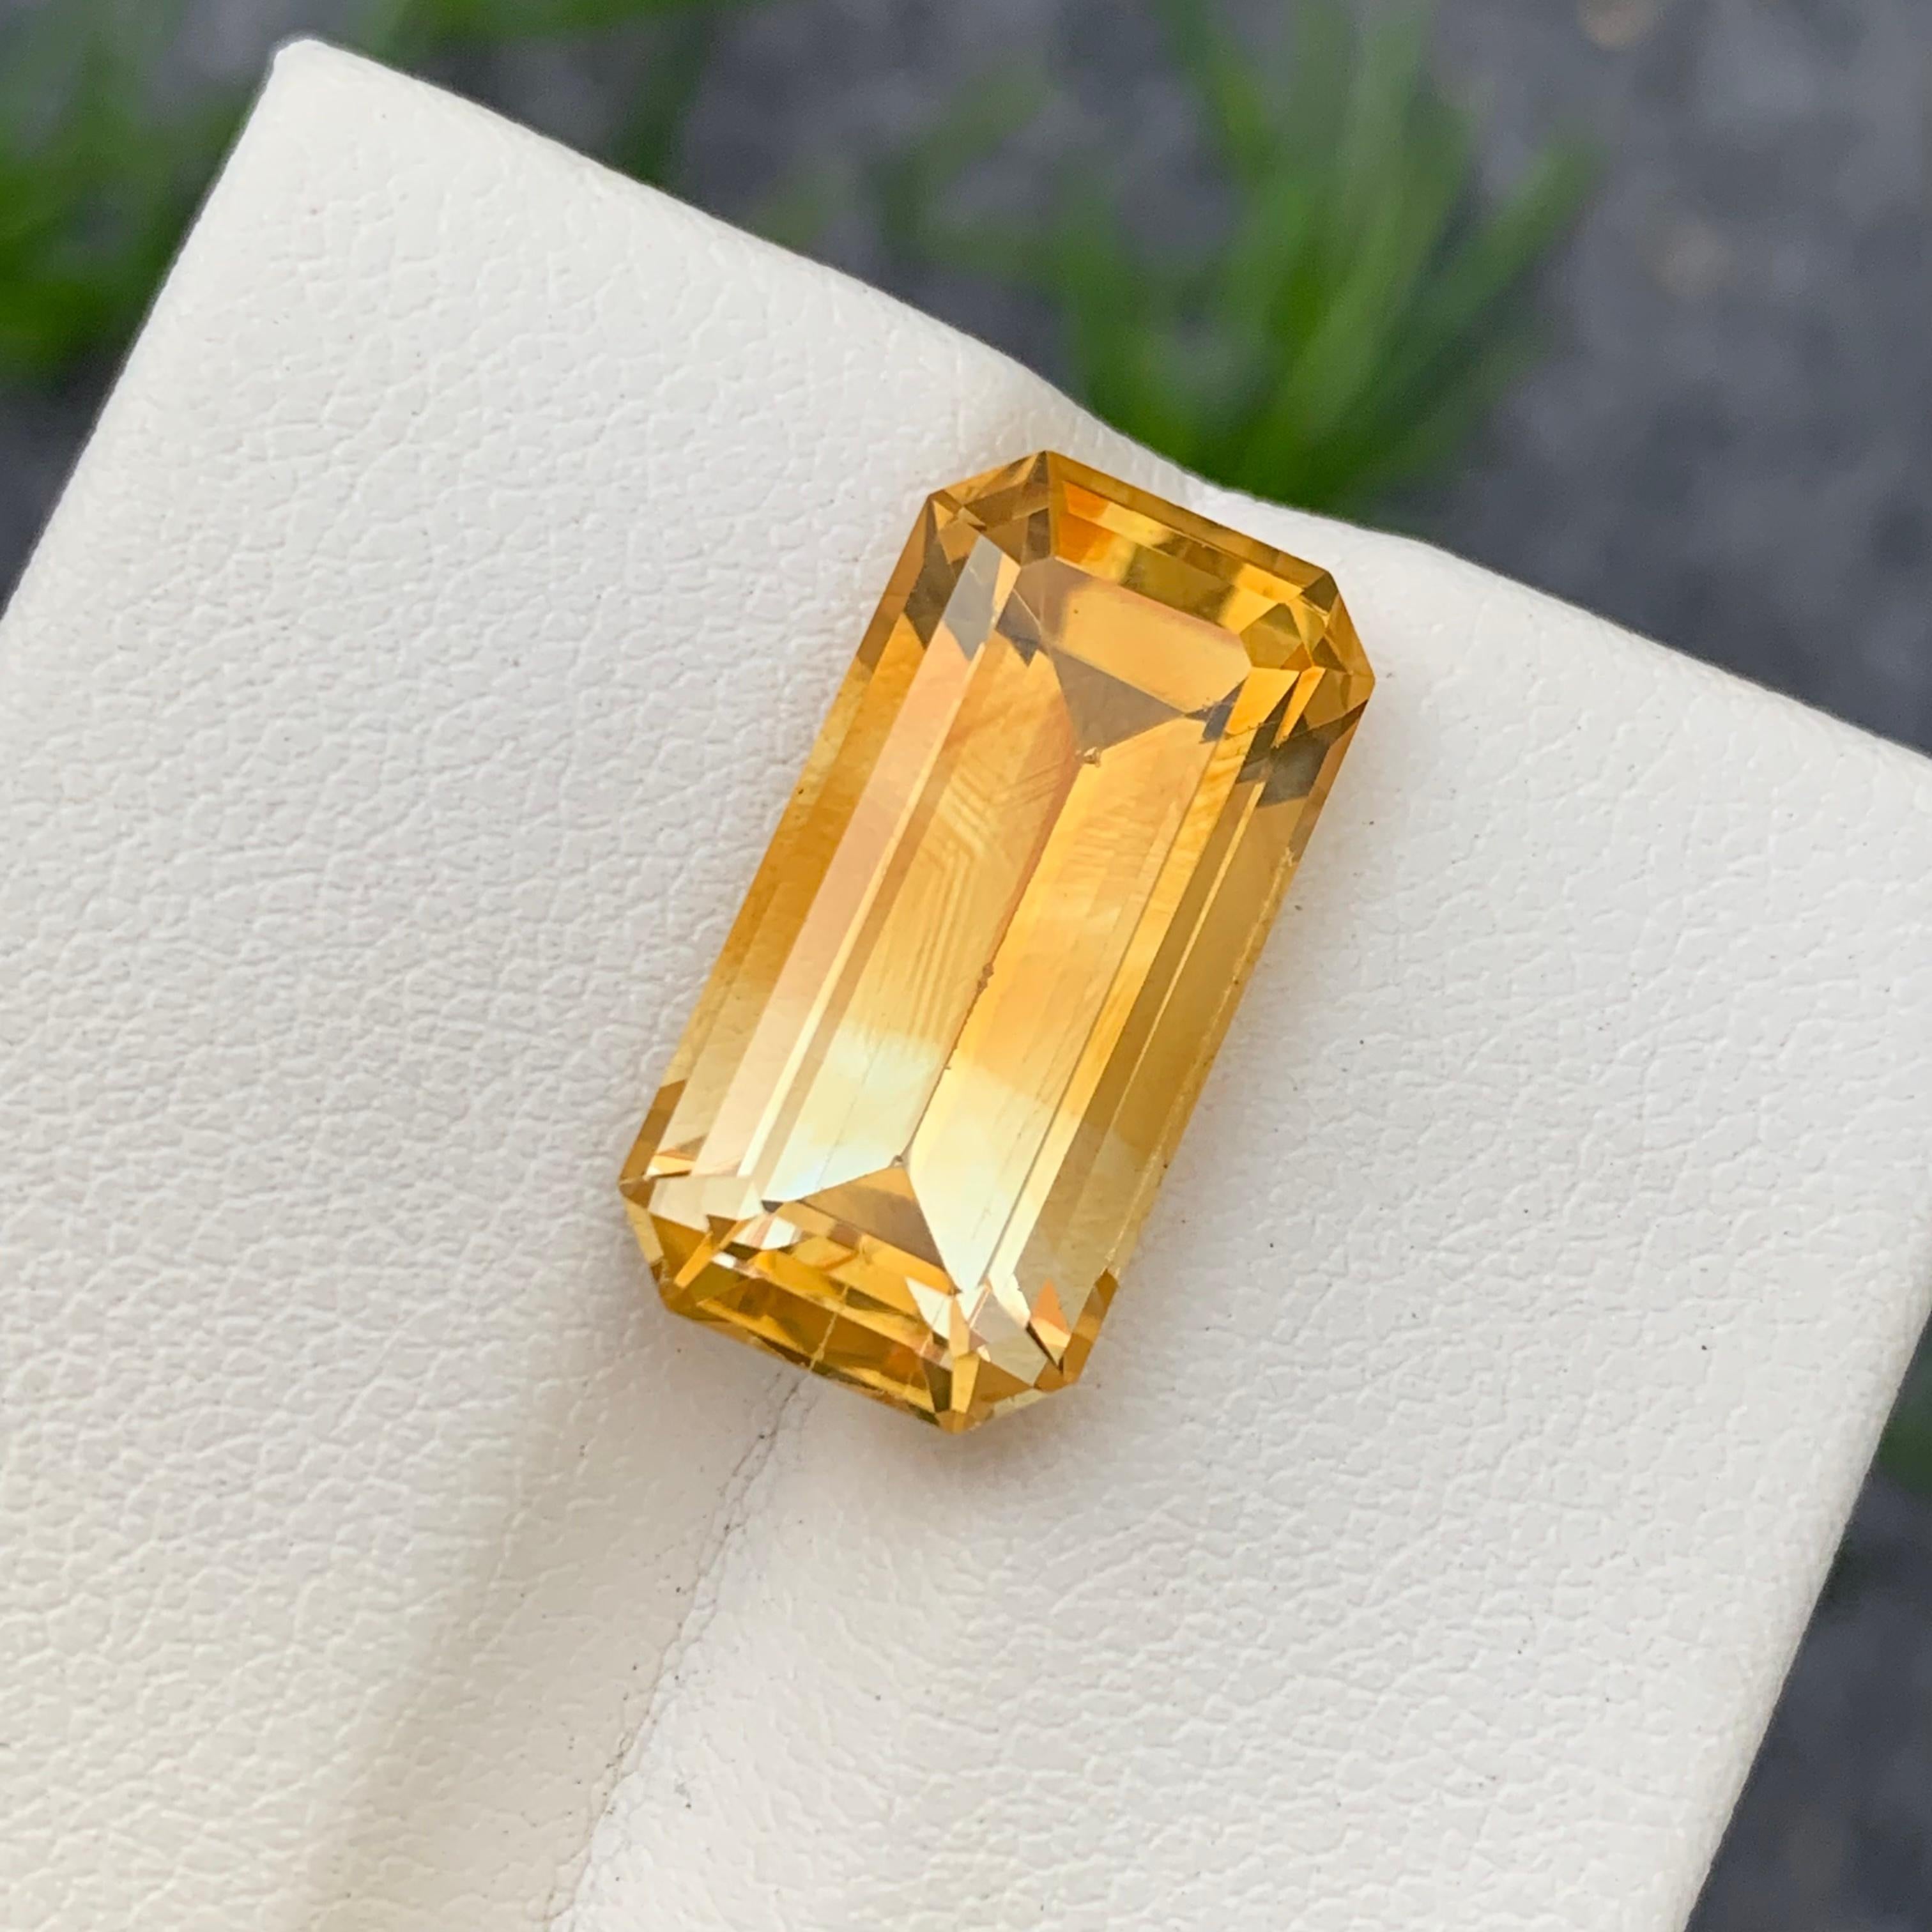 Faceted Citrine 
Weight: 11.30 Carats 
Dimension: 18.9x9.9x8.1 Mm 
Origin: Brazil 
Color: Yellow White
Shape: Emerald 
Treatment: Non
Certficate: On Customer Demand 
.
Citrine is a captivating gemstone known for its vibrant yellow to golden-brown